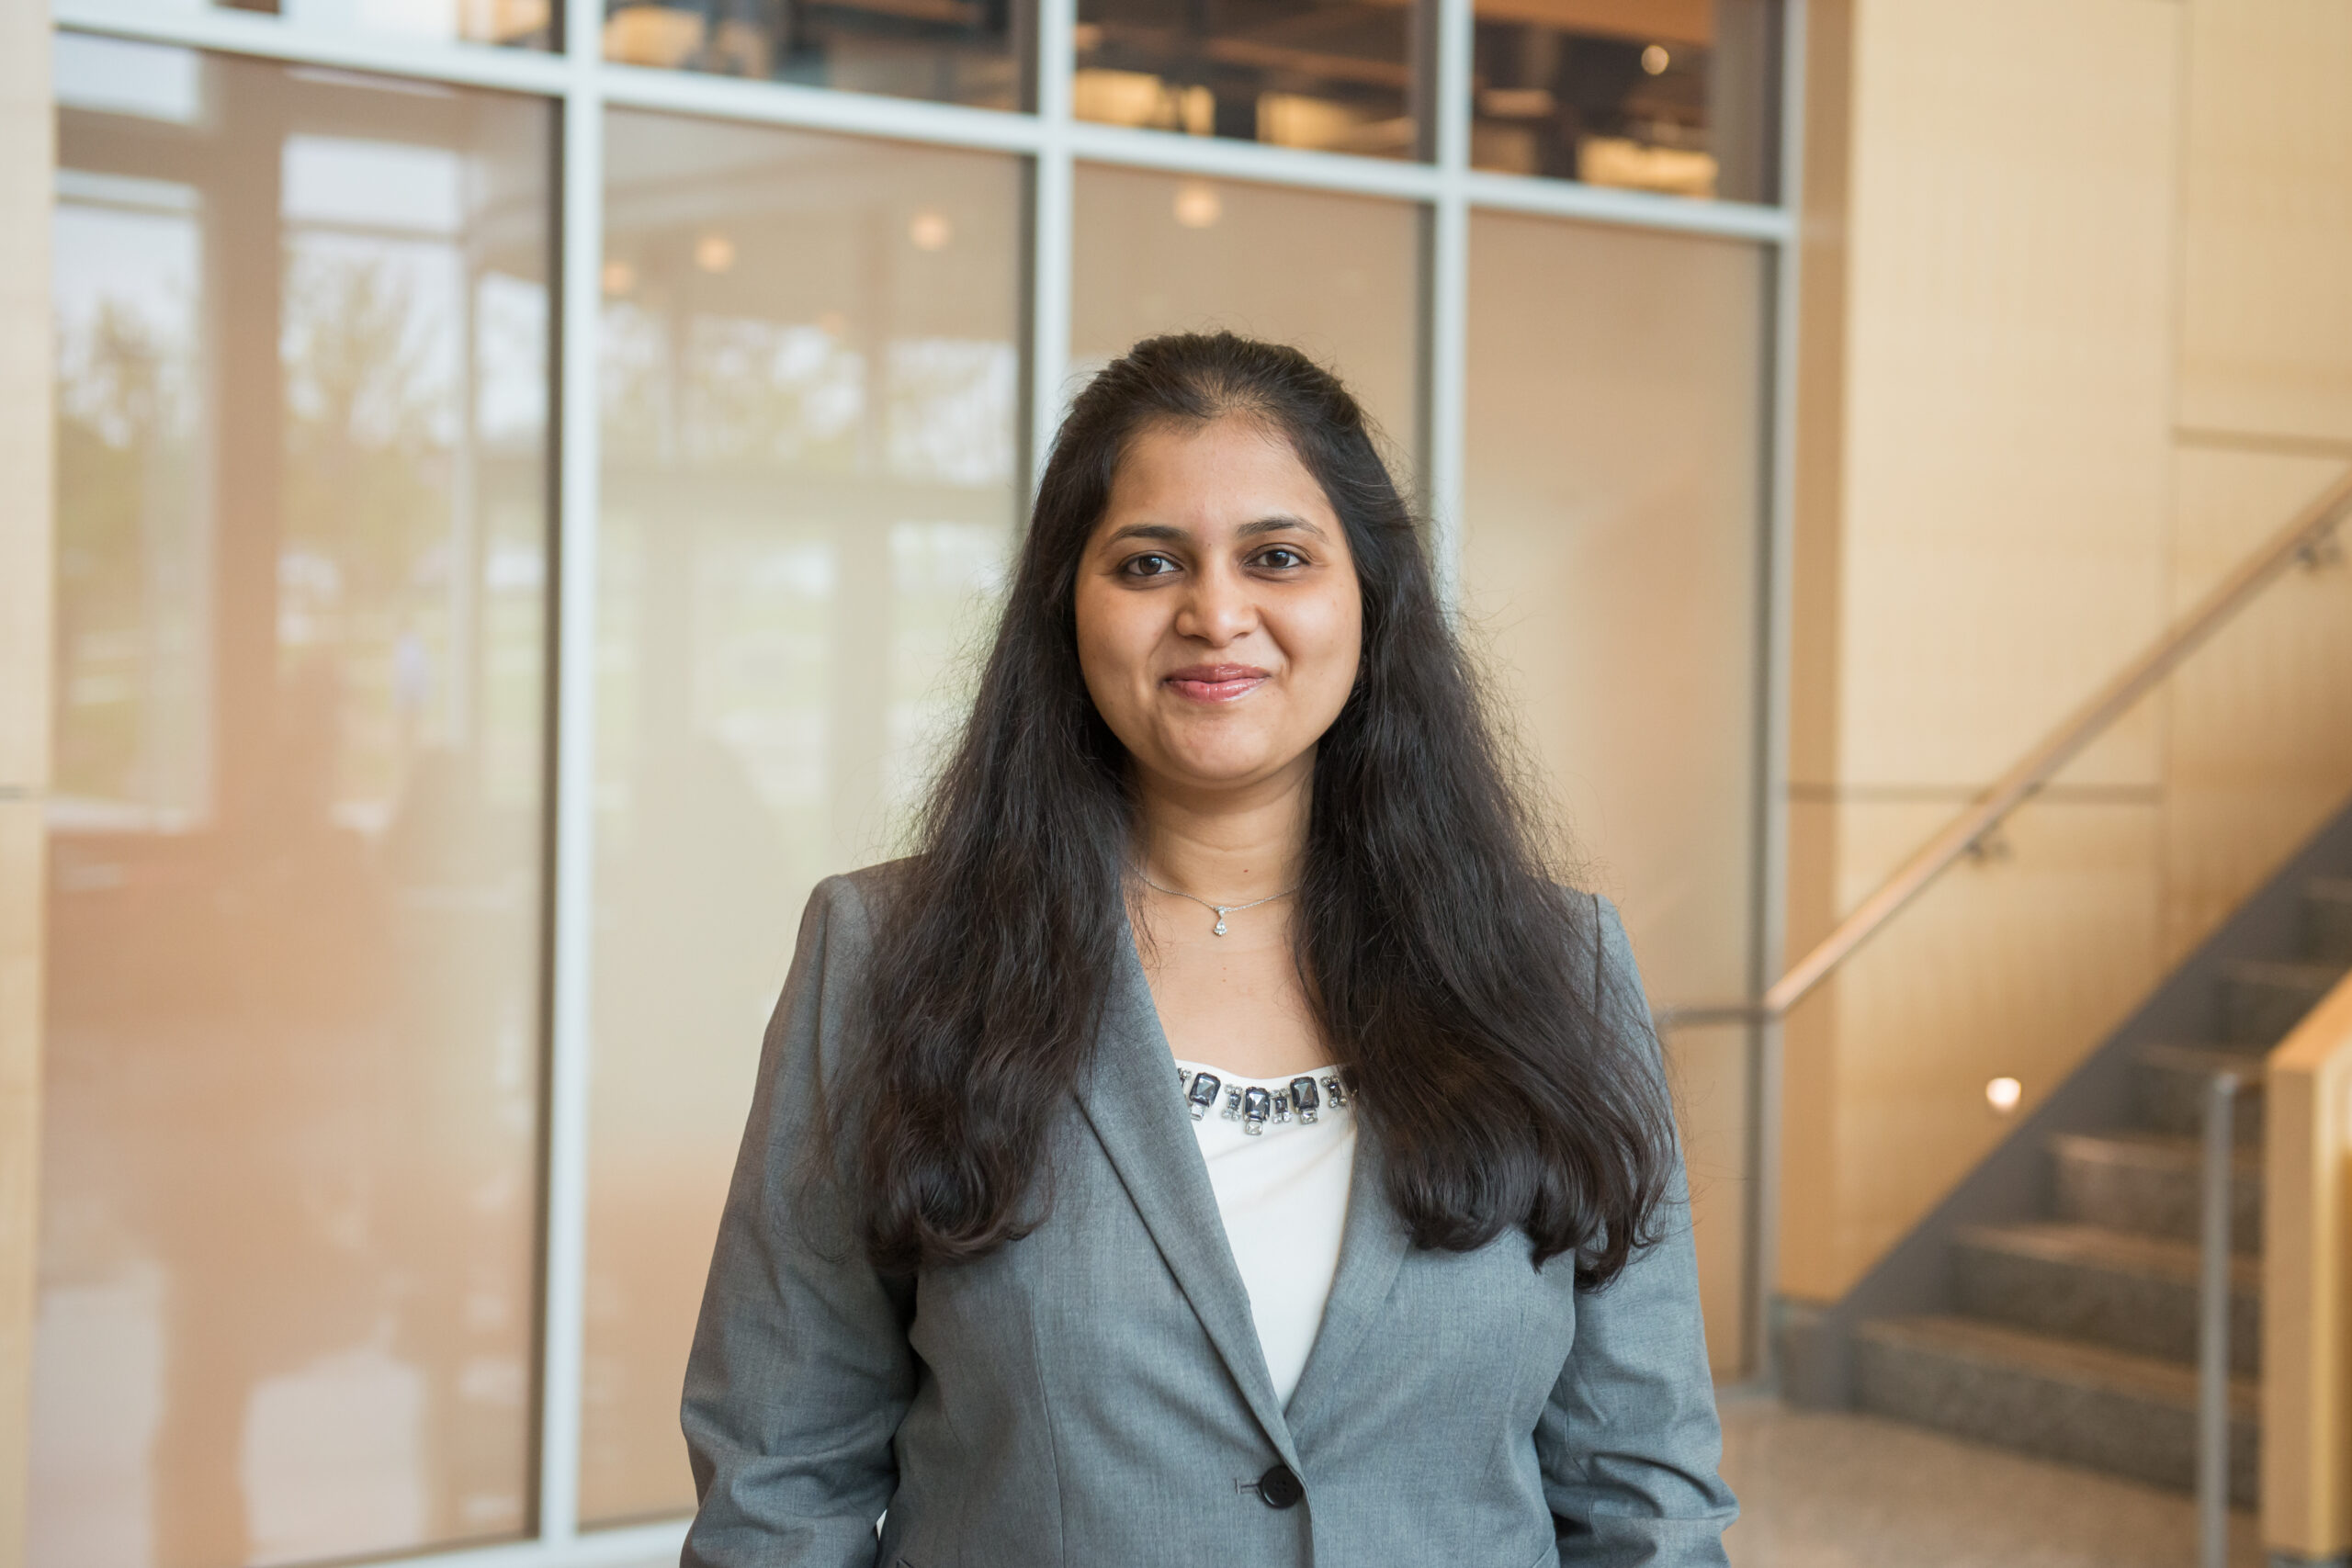 Arti Deore Choudhary, heading to Amazon, thanks cybersecurity faculty for honing her leadership skills